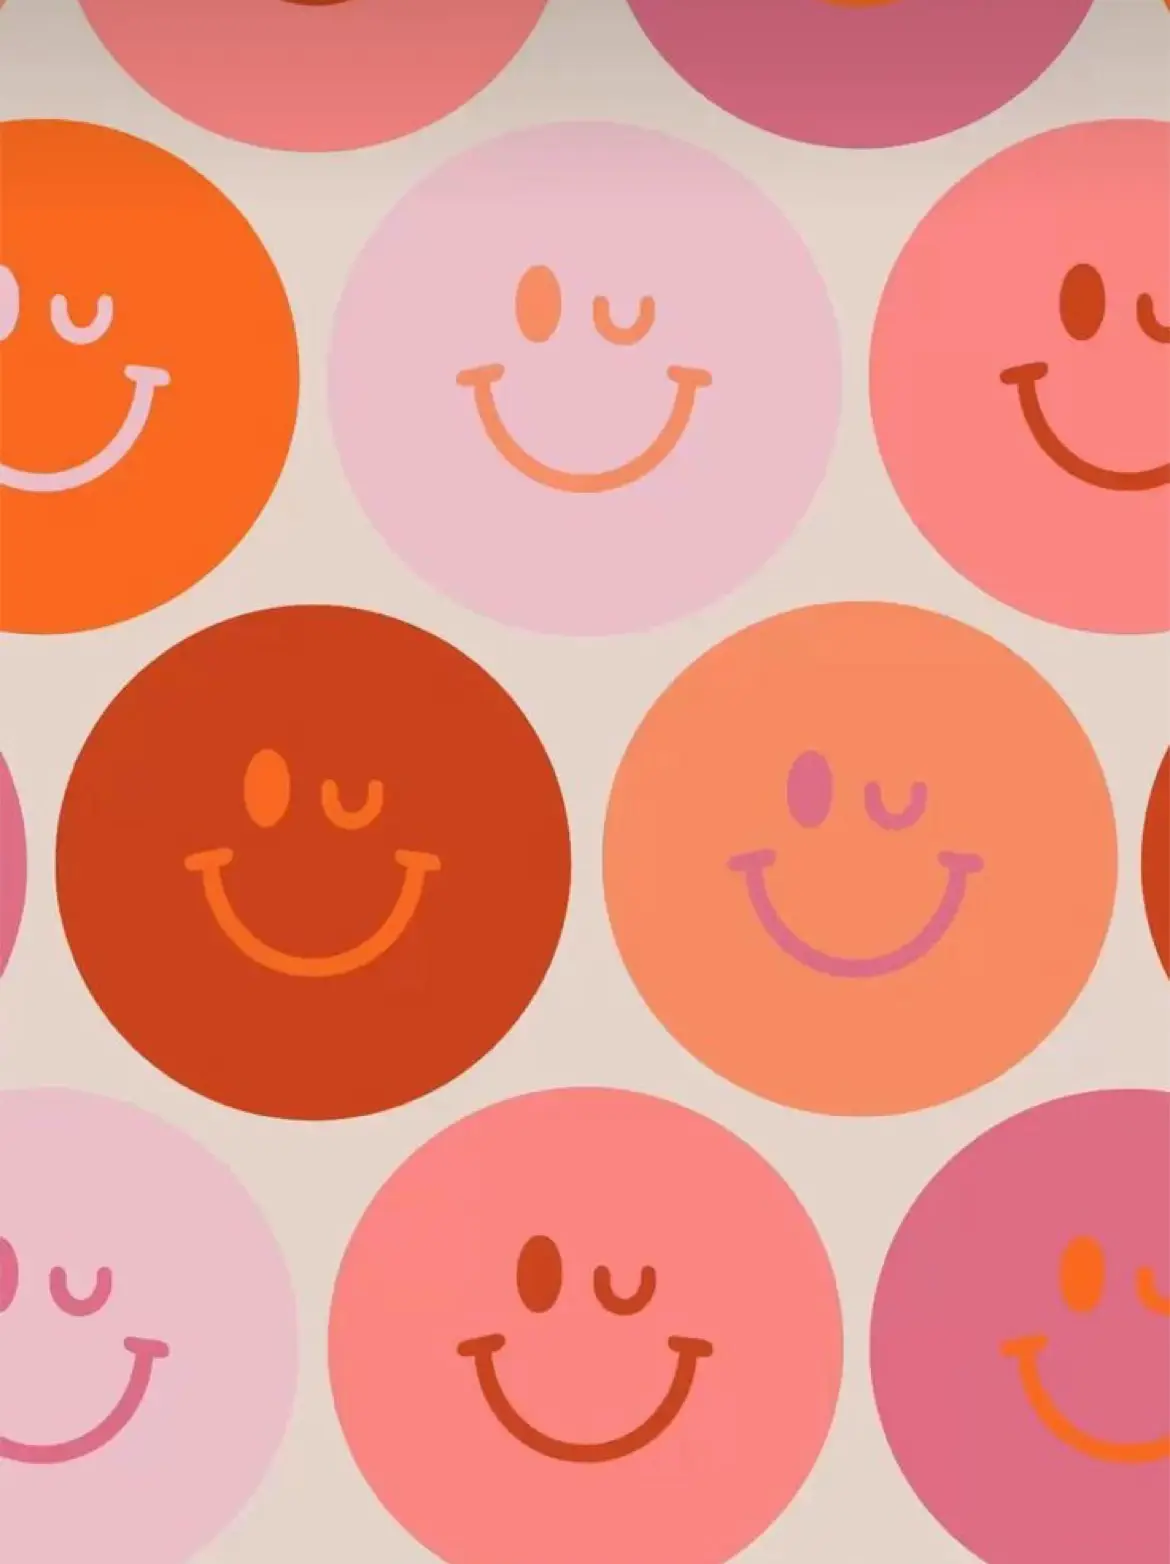 SMILEY FACE WALLPAPERS ☻